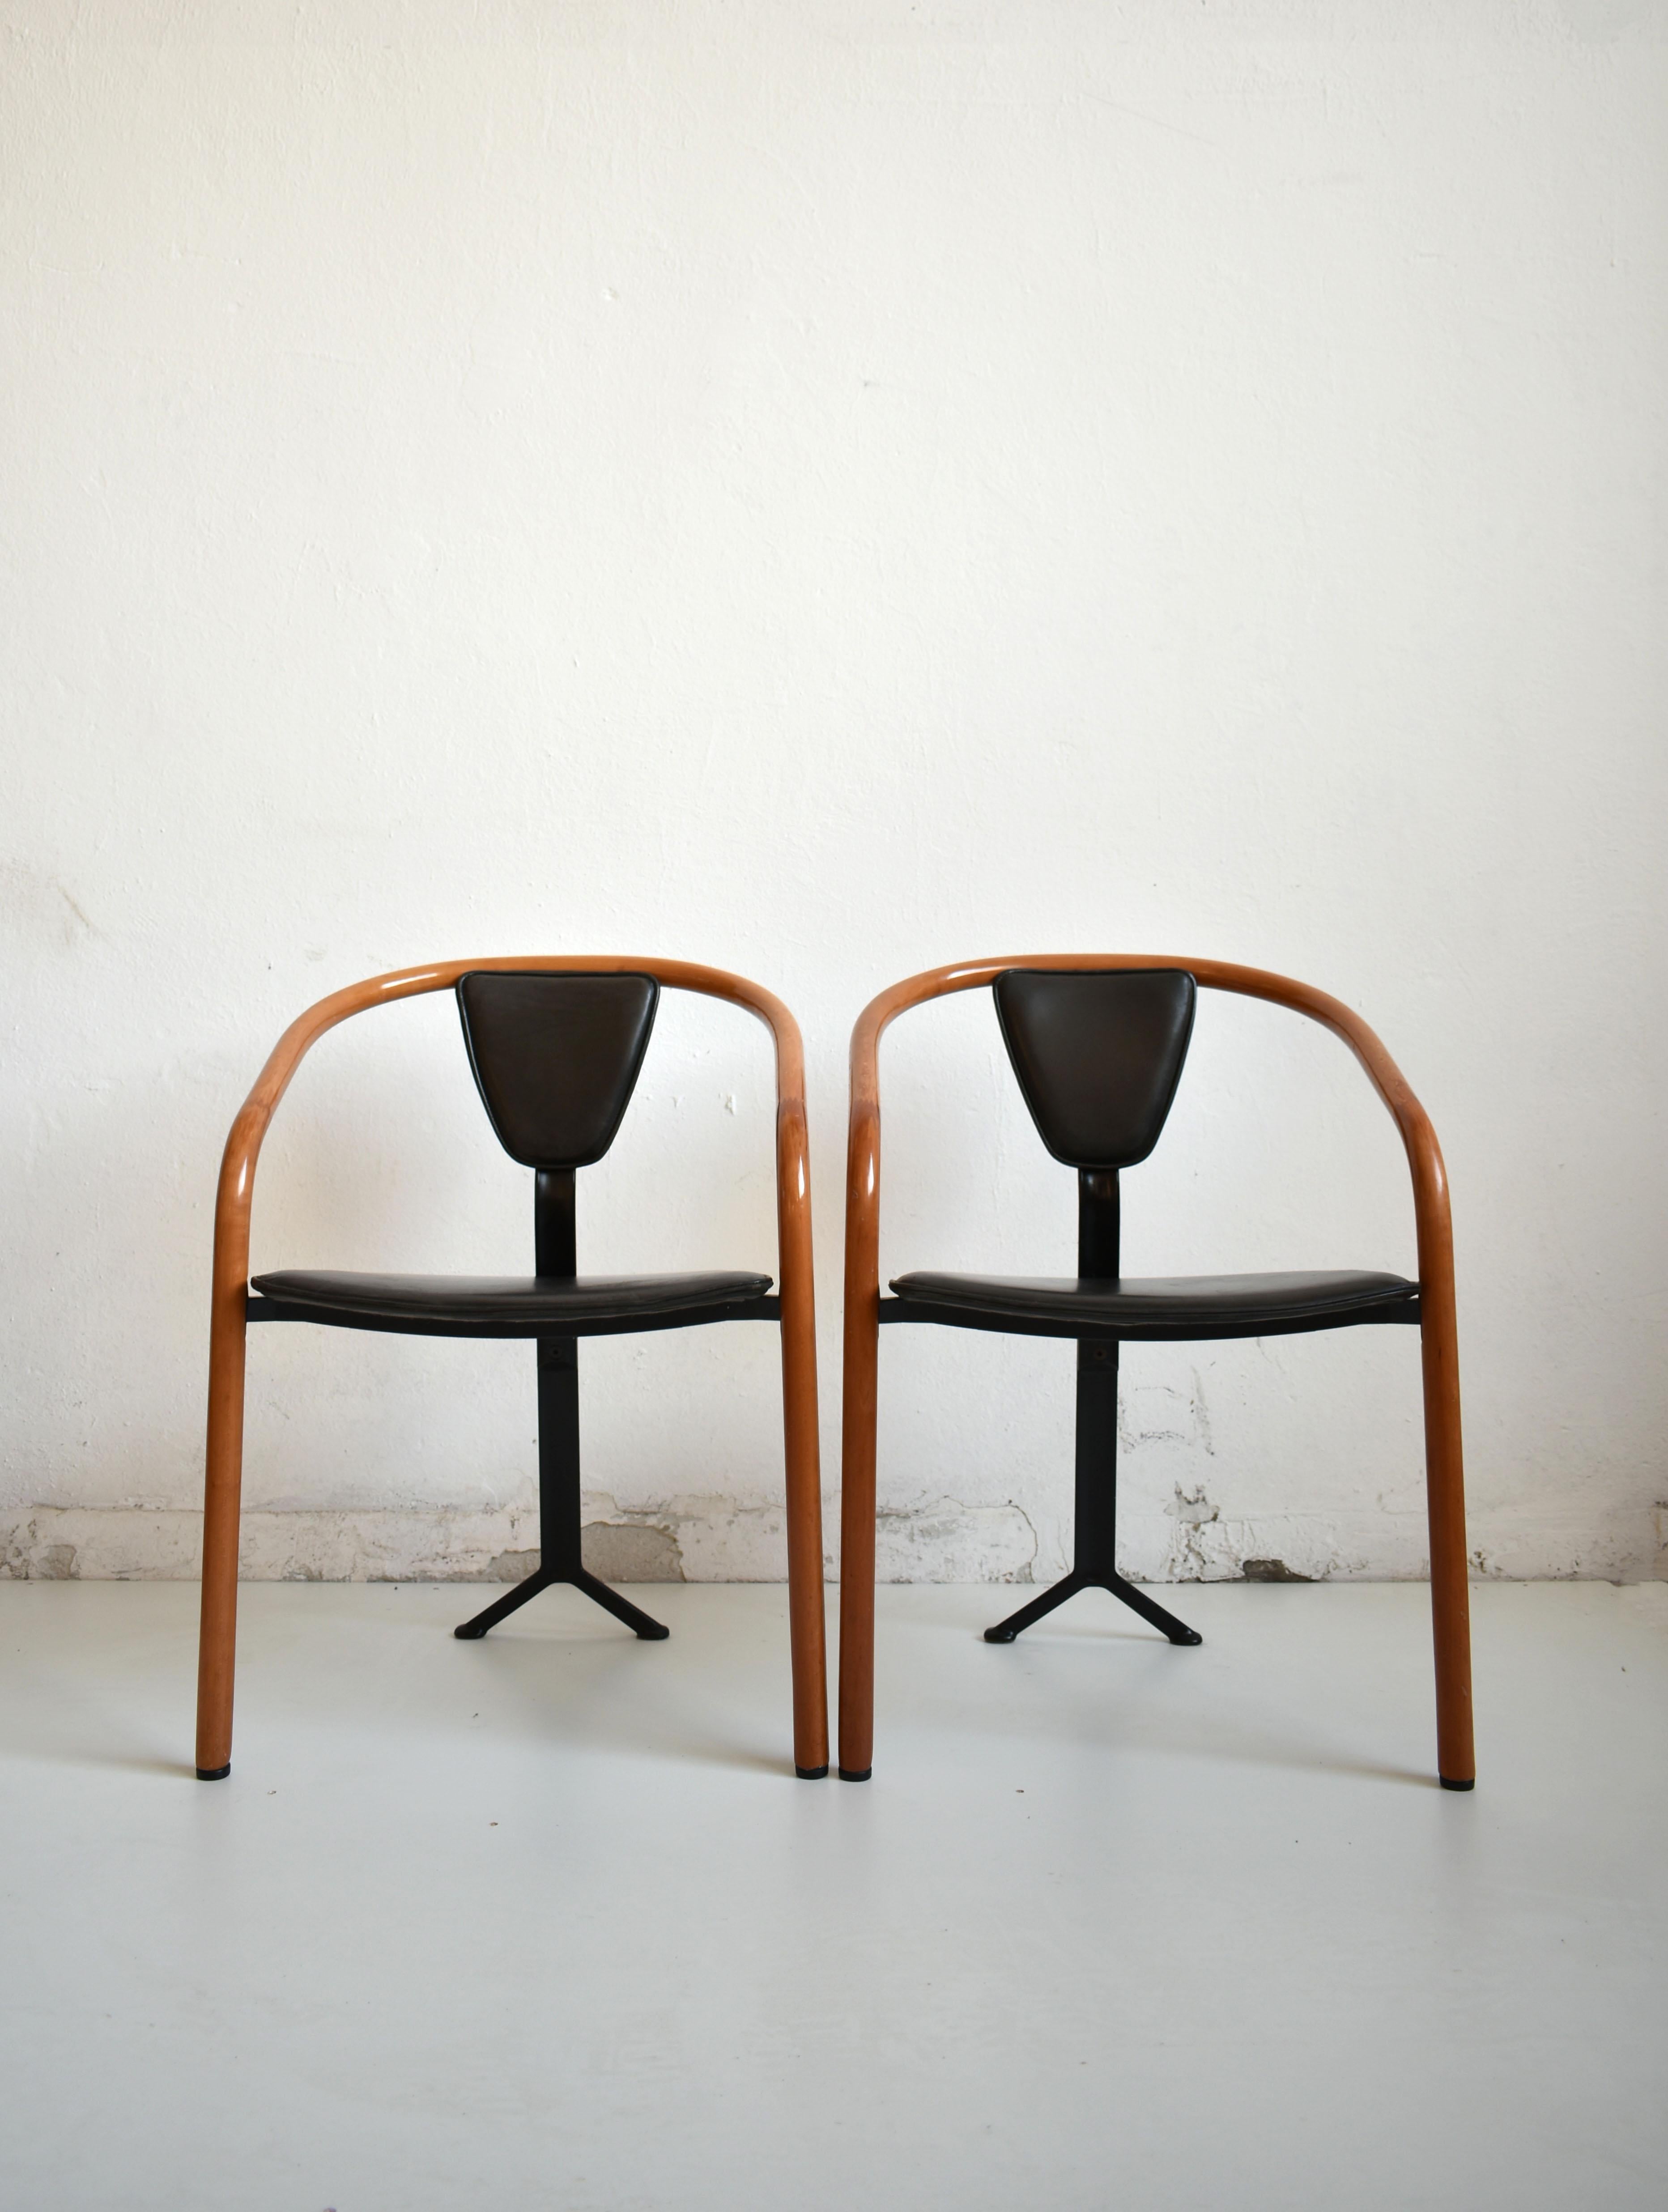 Set of 2 tripod dining chairs ‘Tacchi' by Toshiyuki Kita for AIDEC, Japan. Designed and manufactured in the 1980s

'Born in Osaka in 1942 Kita’s designs have won international acclaim for both, his adherence to sustainable design and his organic,